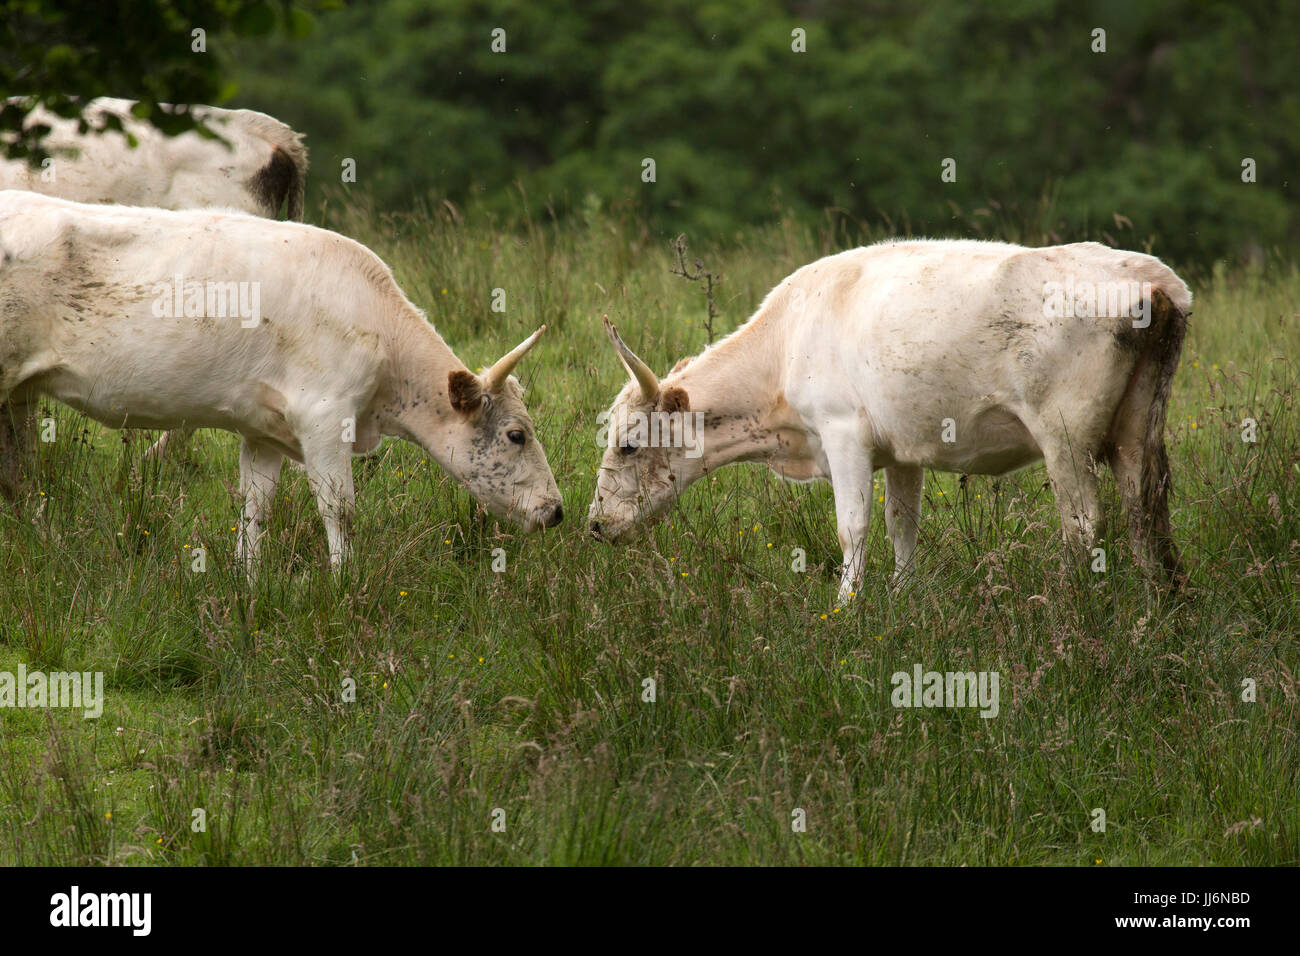 Rutting wild cattle at Chillingham in Northumberland, England. Stock Photo